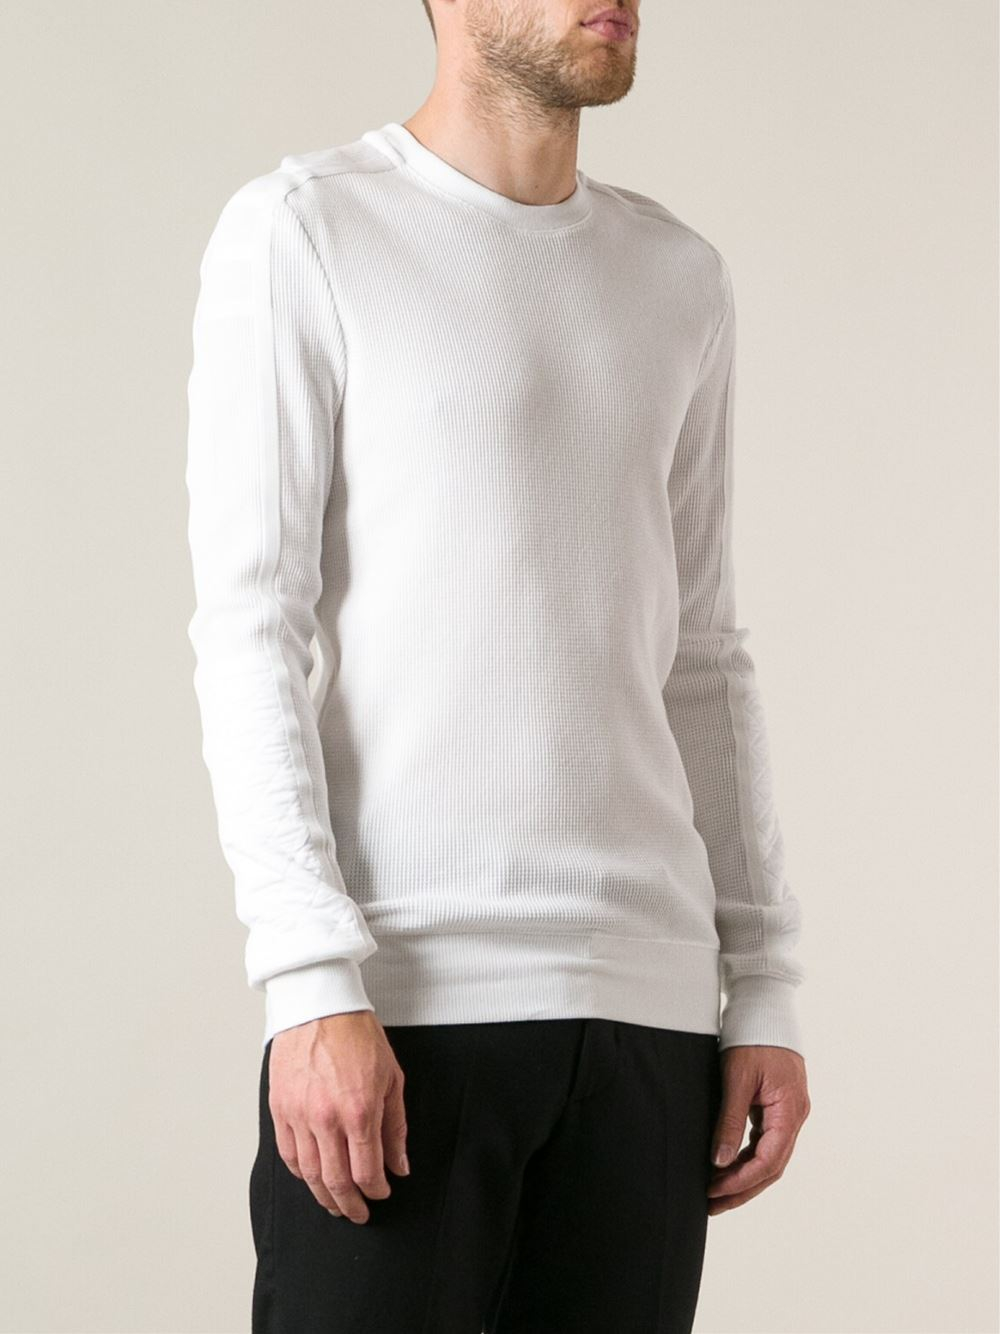 Helmut Lang Waffle Weave Sweater in White for Men - Lyst